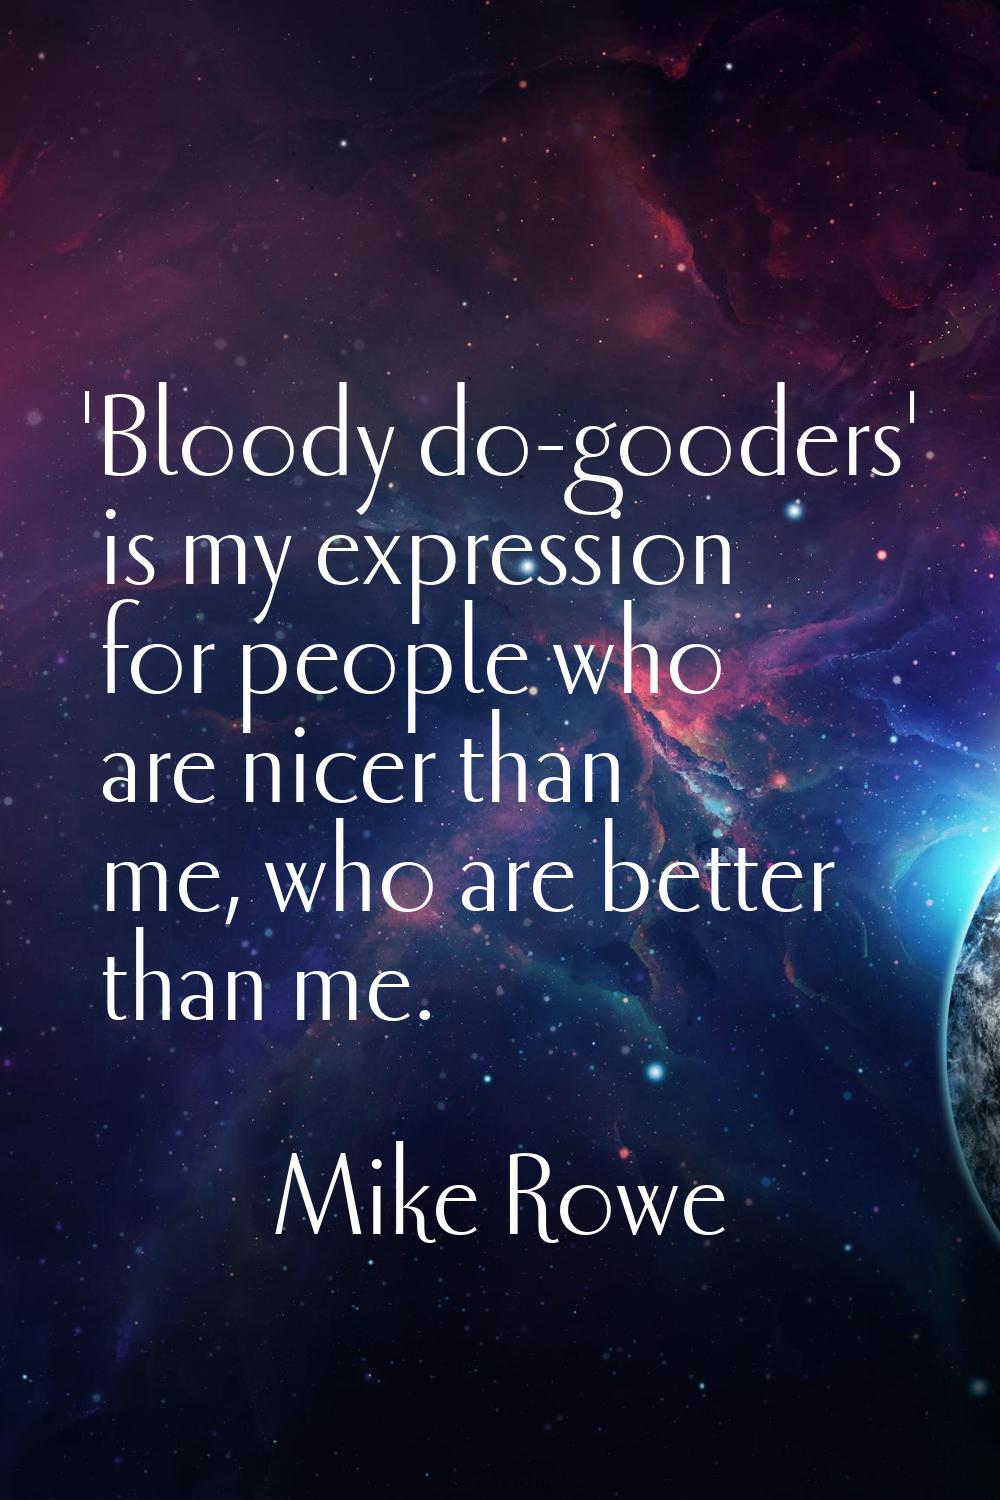 'Bloody do-gooders' is my expression for people who are nicer than me, who are better than me.